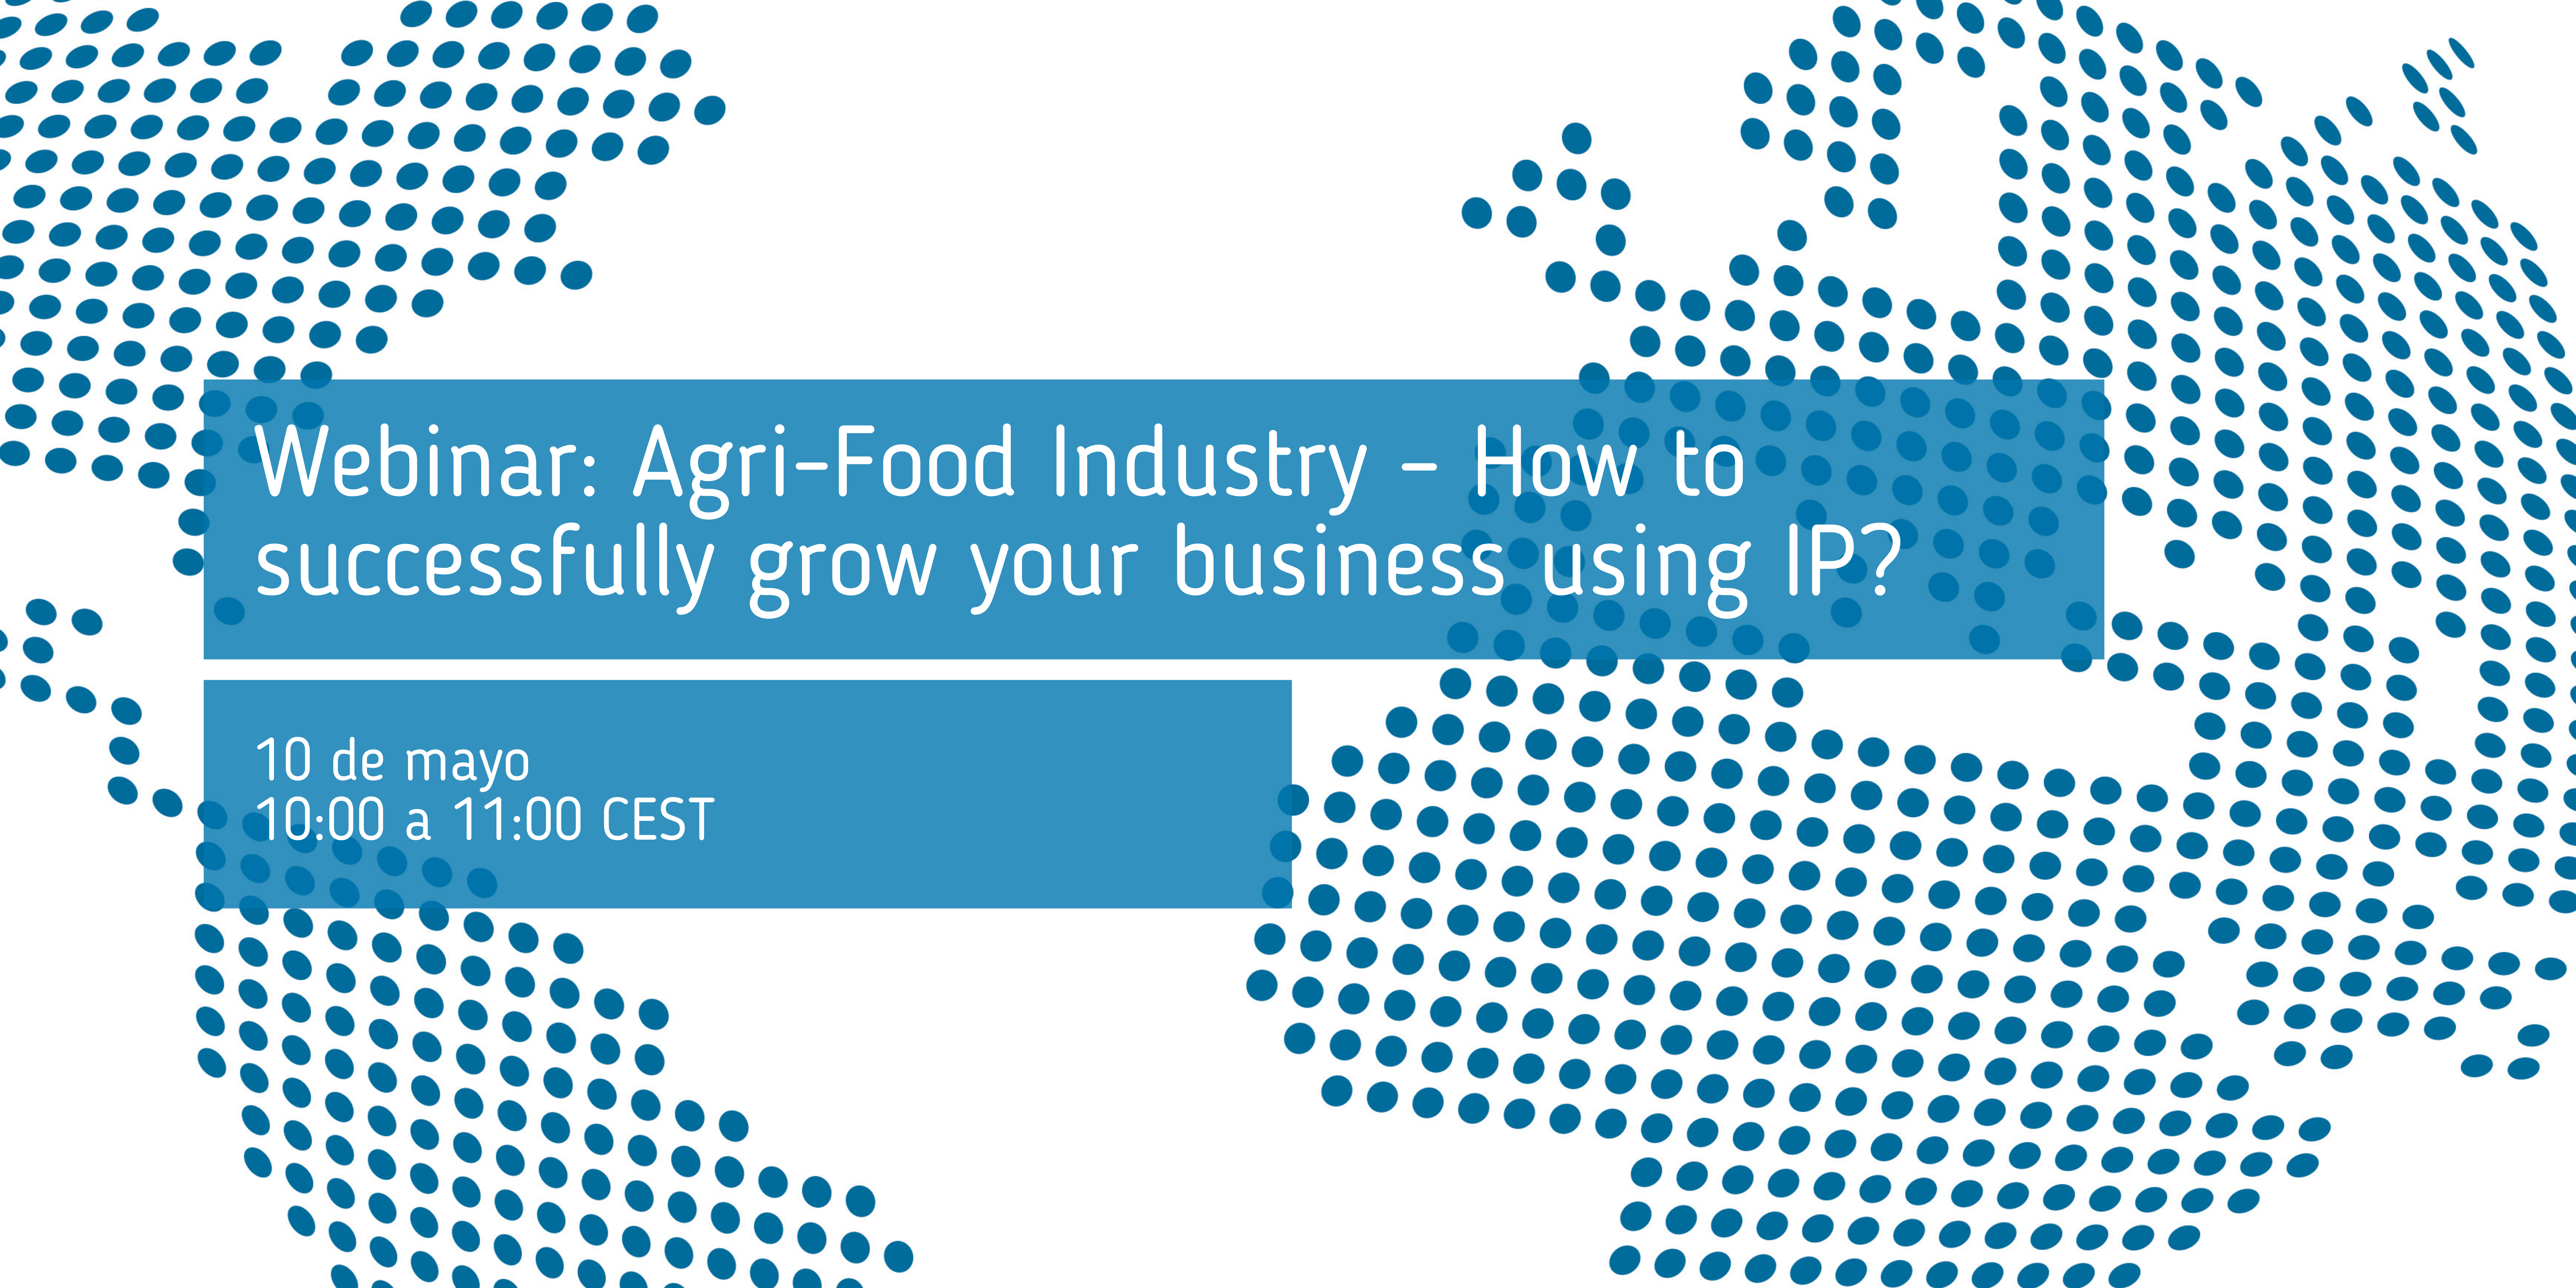 Webinar_Agri_Food_Industry_How_to_successfully_grow_your_business_using_IP